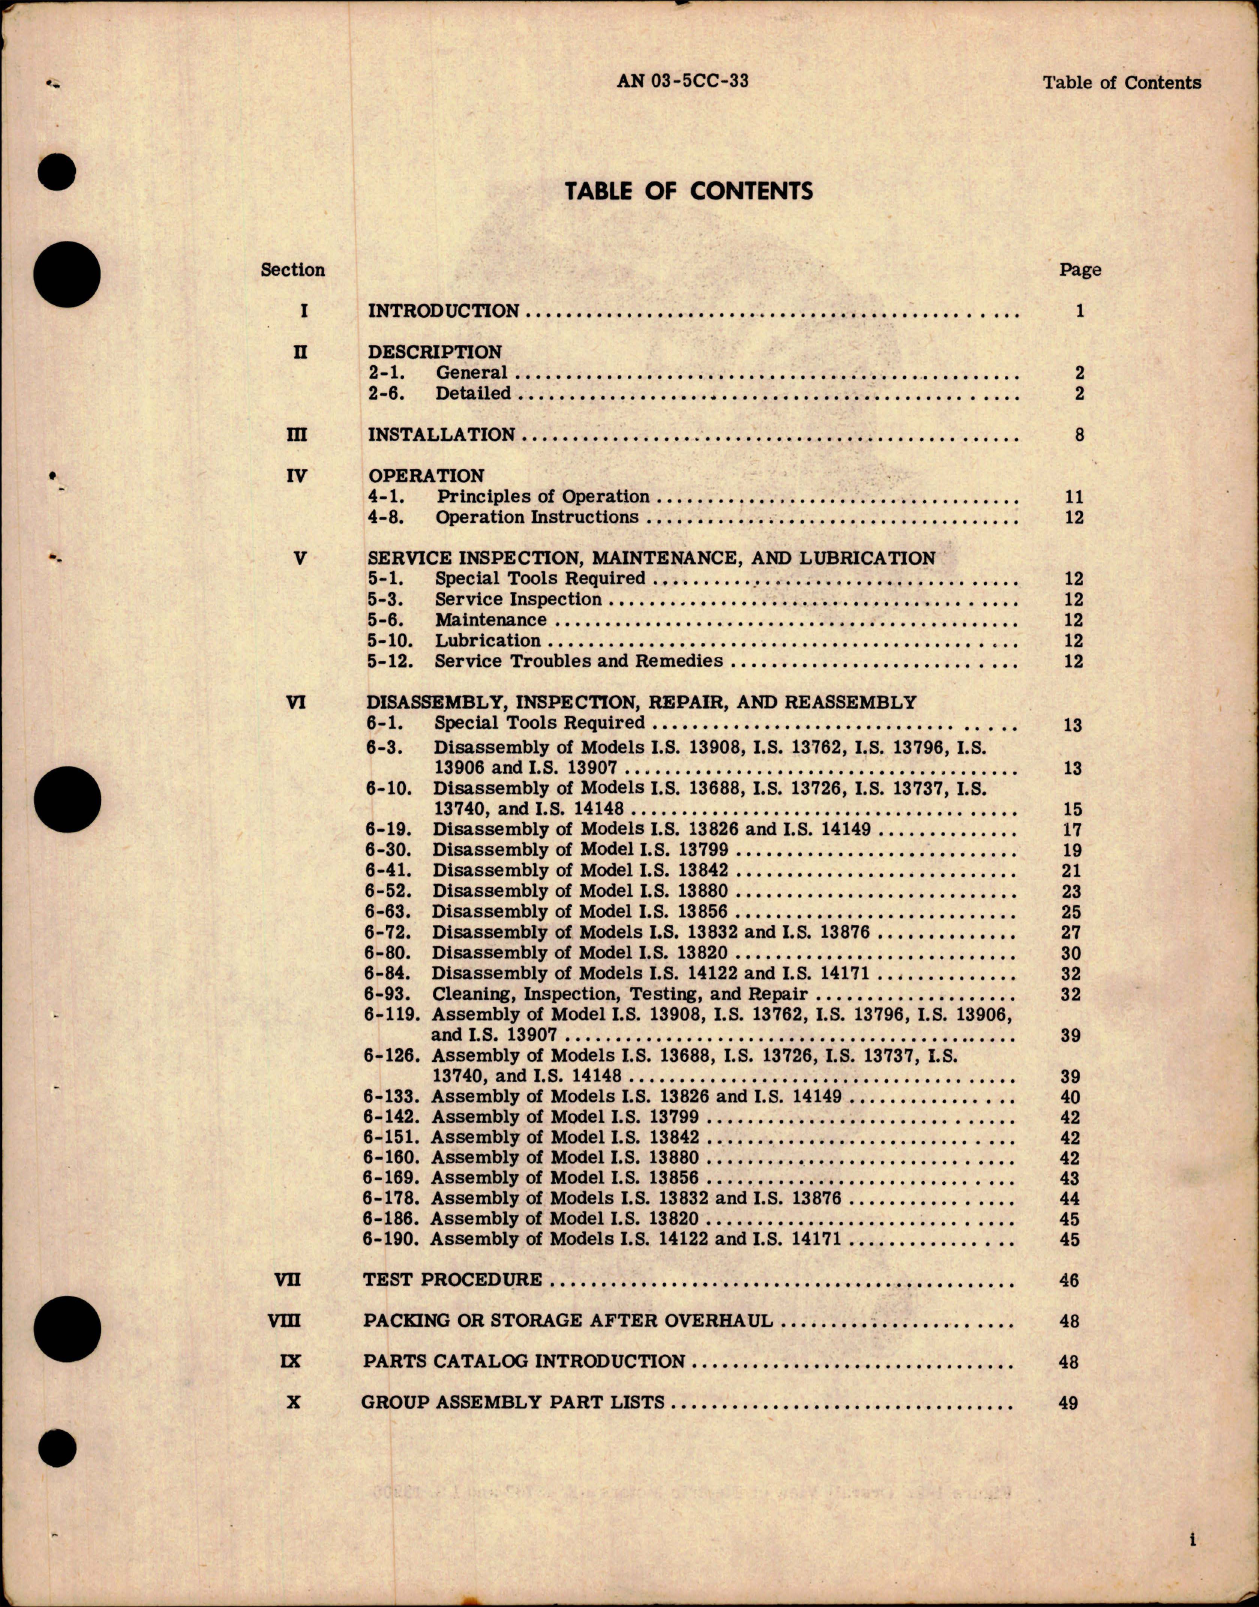 Sample page 5 from AirCorps Library document: Operation, Service, and Overhaul with Parts Catalog for Electric Motors 